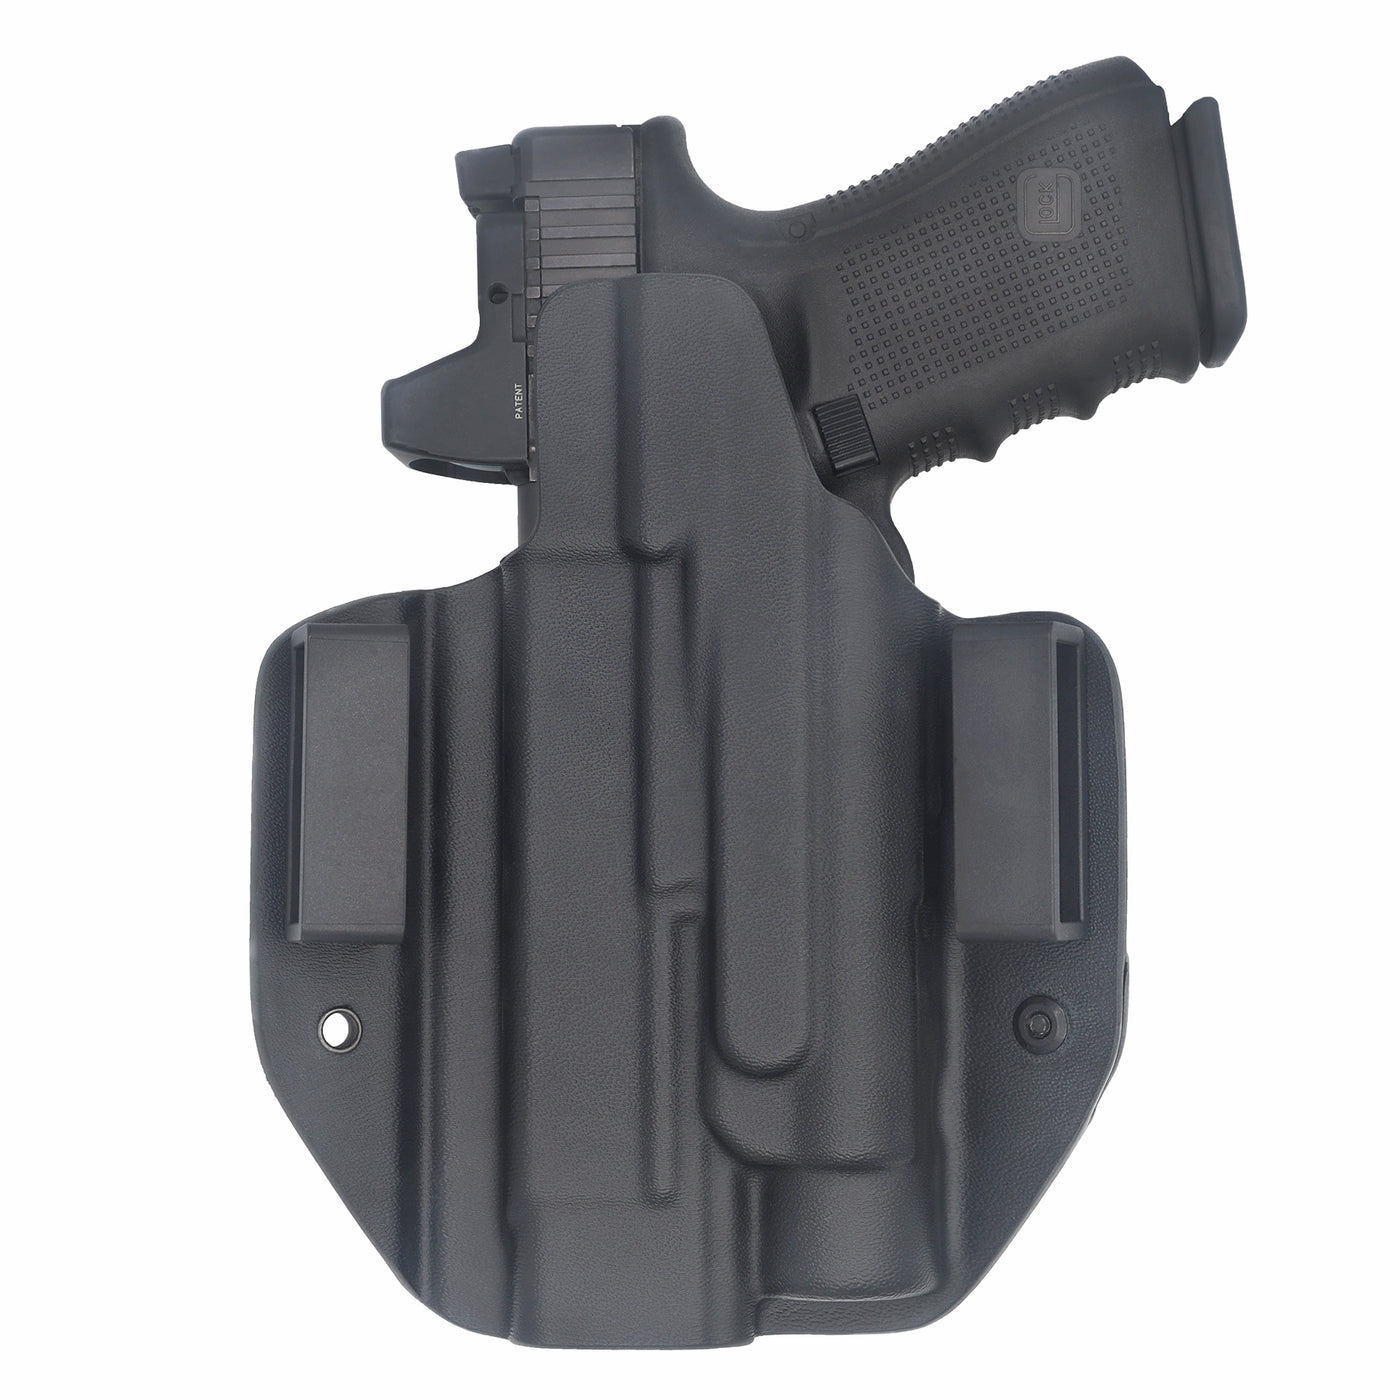 C&G Holsters quickship OWB Tactical Glock 20/21 Streamlight TLR1 in holstered position back view